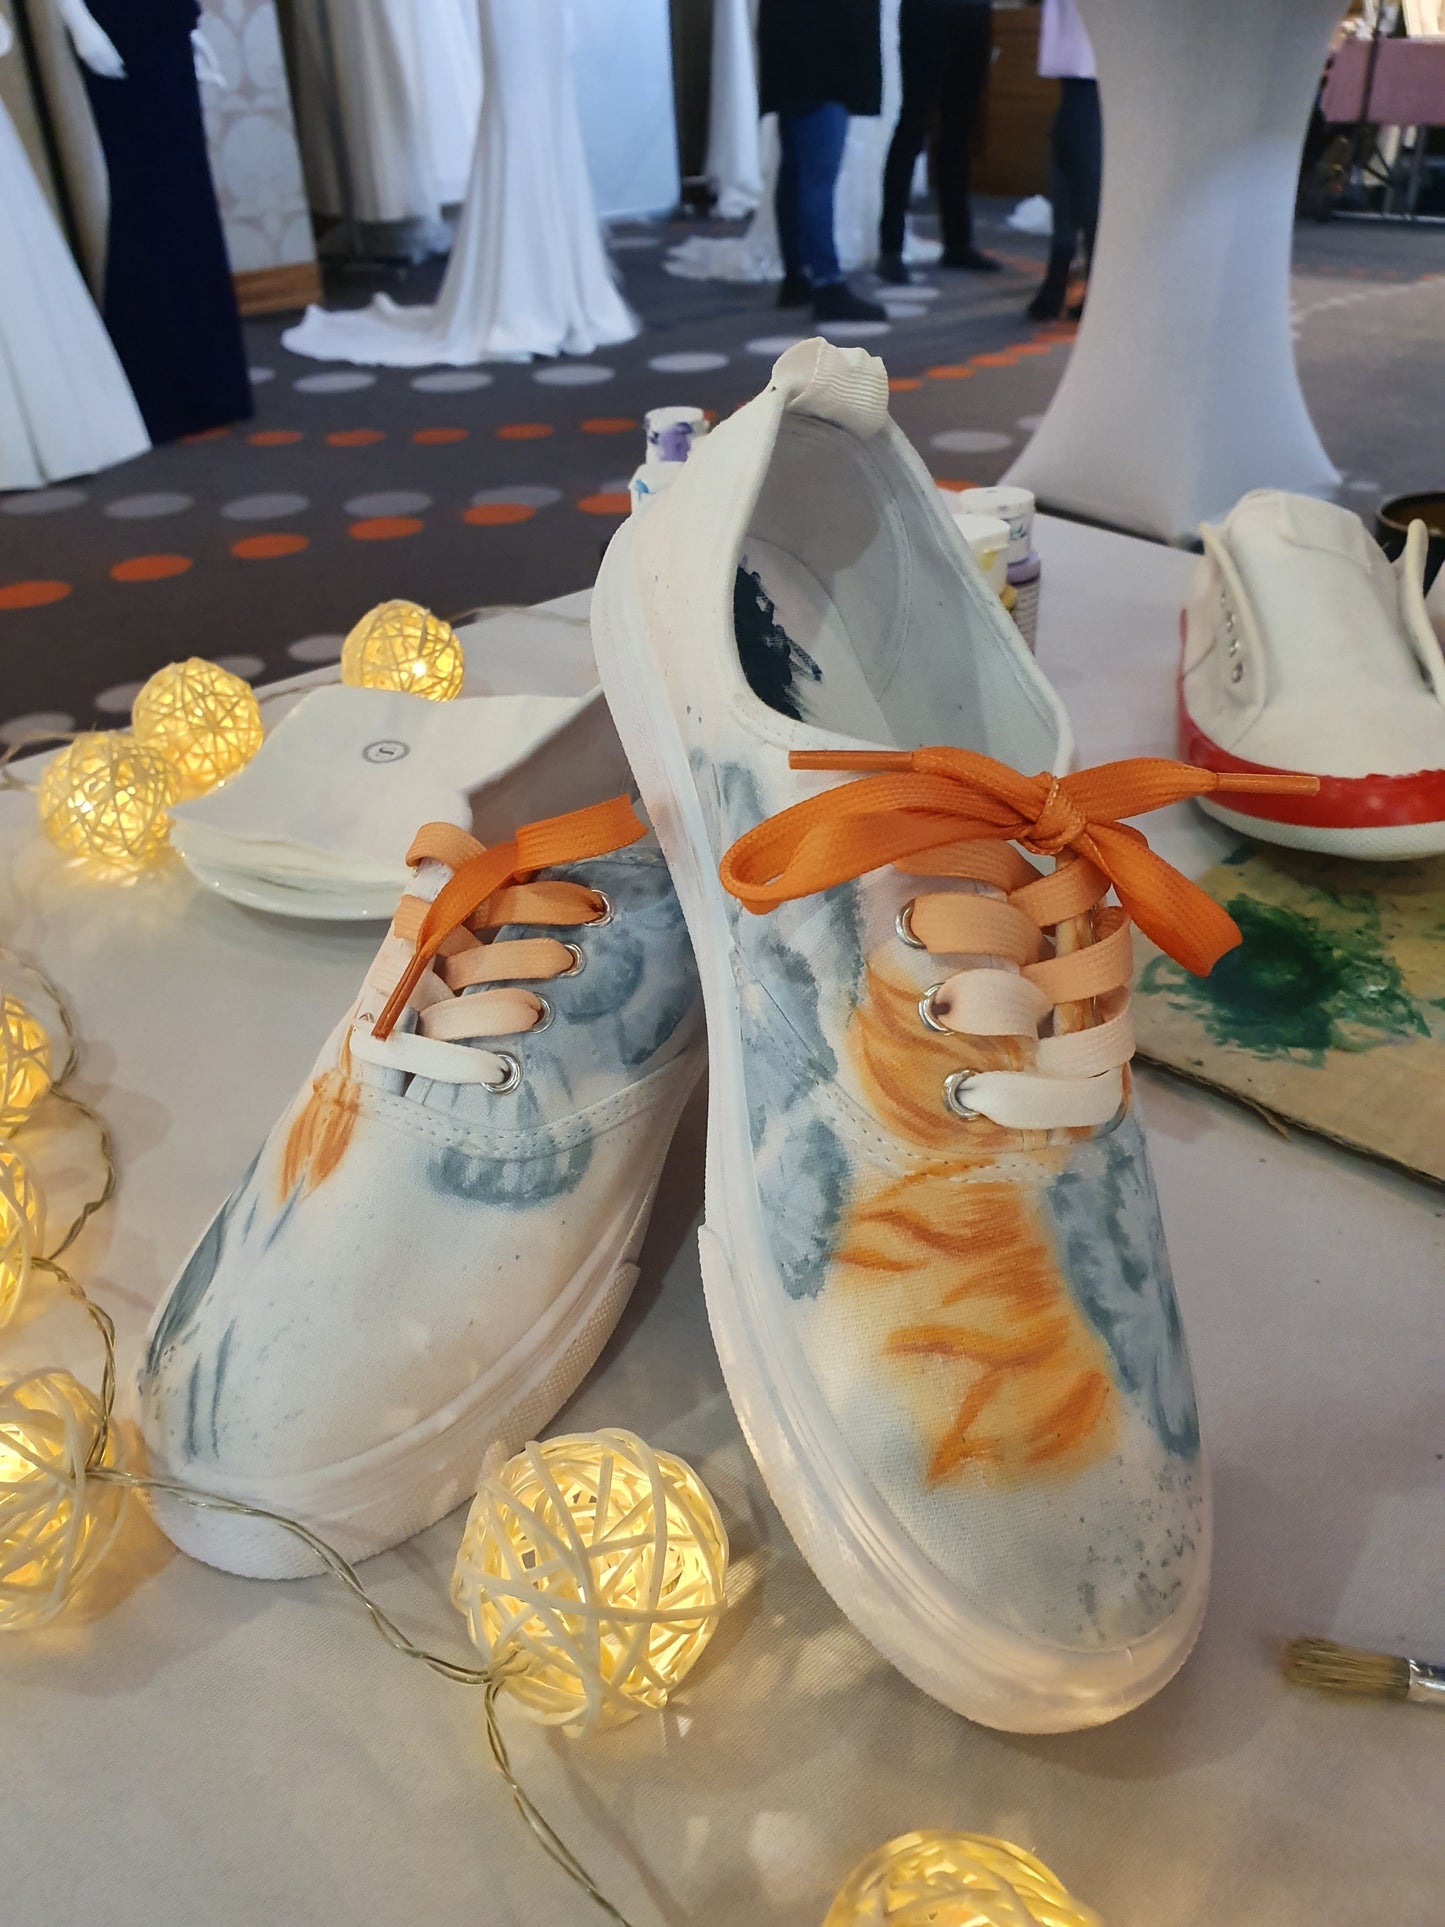 Tenisi Pictati, Painted Sneakers, Pictura Manuala Tenisi, handmade shoes, Everyday shoes, Woman Fashion, customized shoes